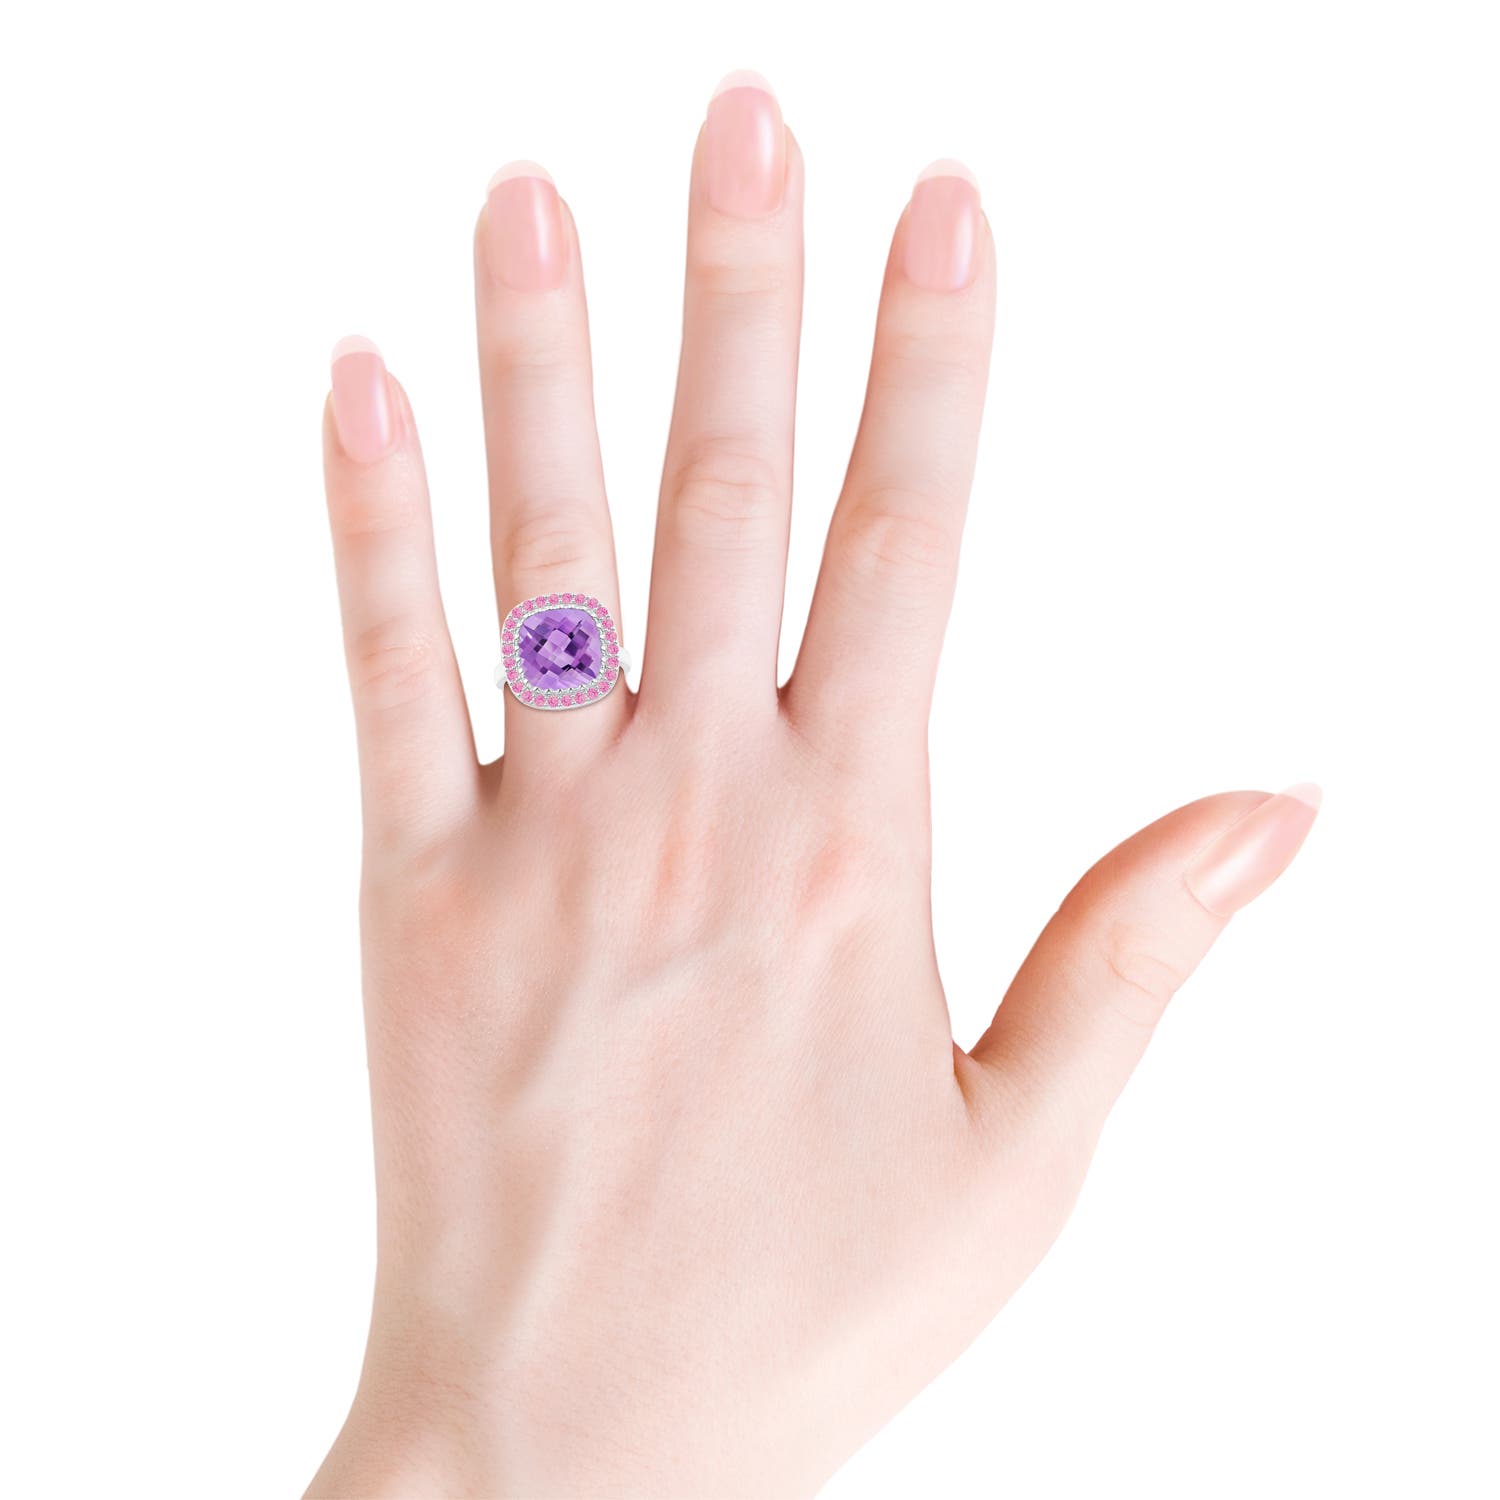 A - Amethyst / 5.4 CT / 14 KT White Gold